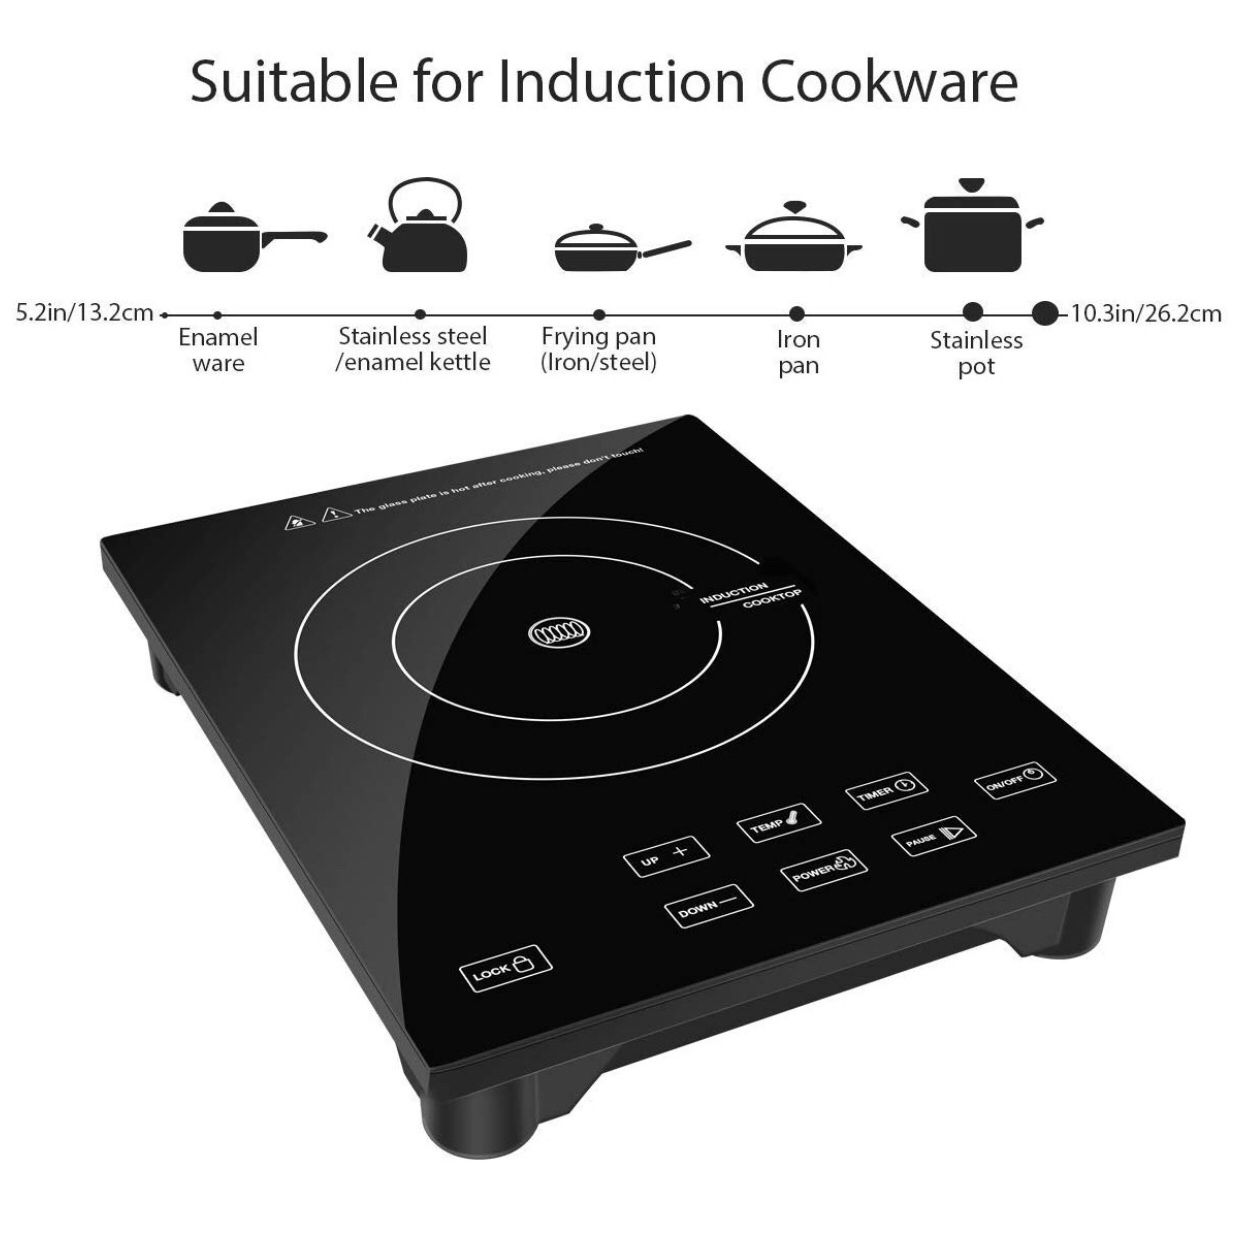 Induction Cooktop Portable Countertop Burner, 1800W Electric Induction Cooker with Sensor Touch Suitable for Iron, Cast Iron, Stainless Steel Cookware